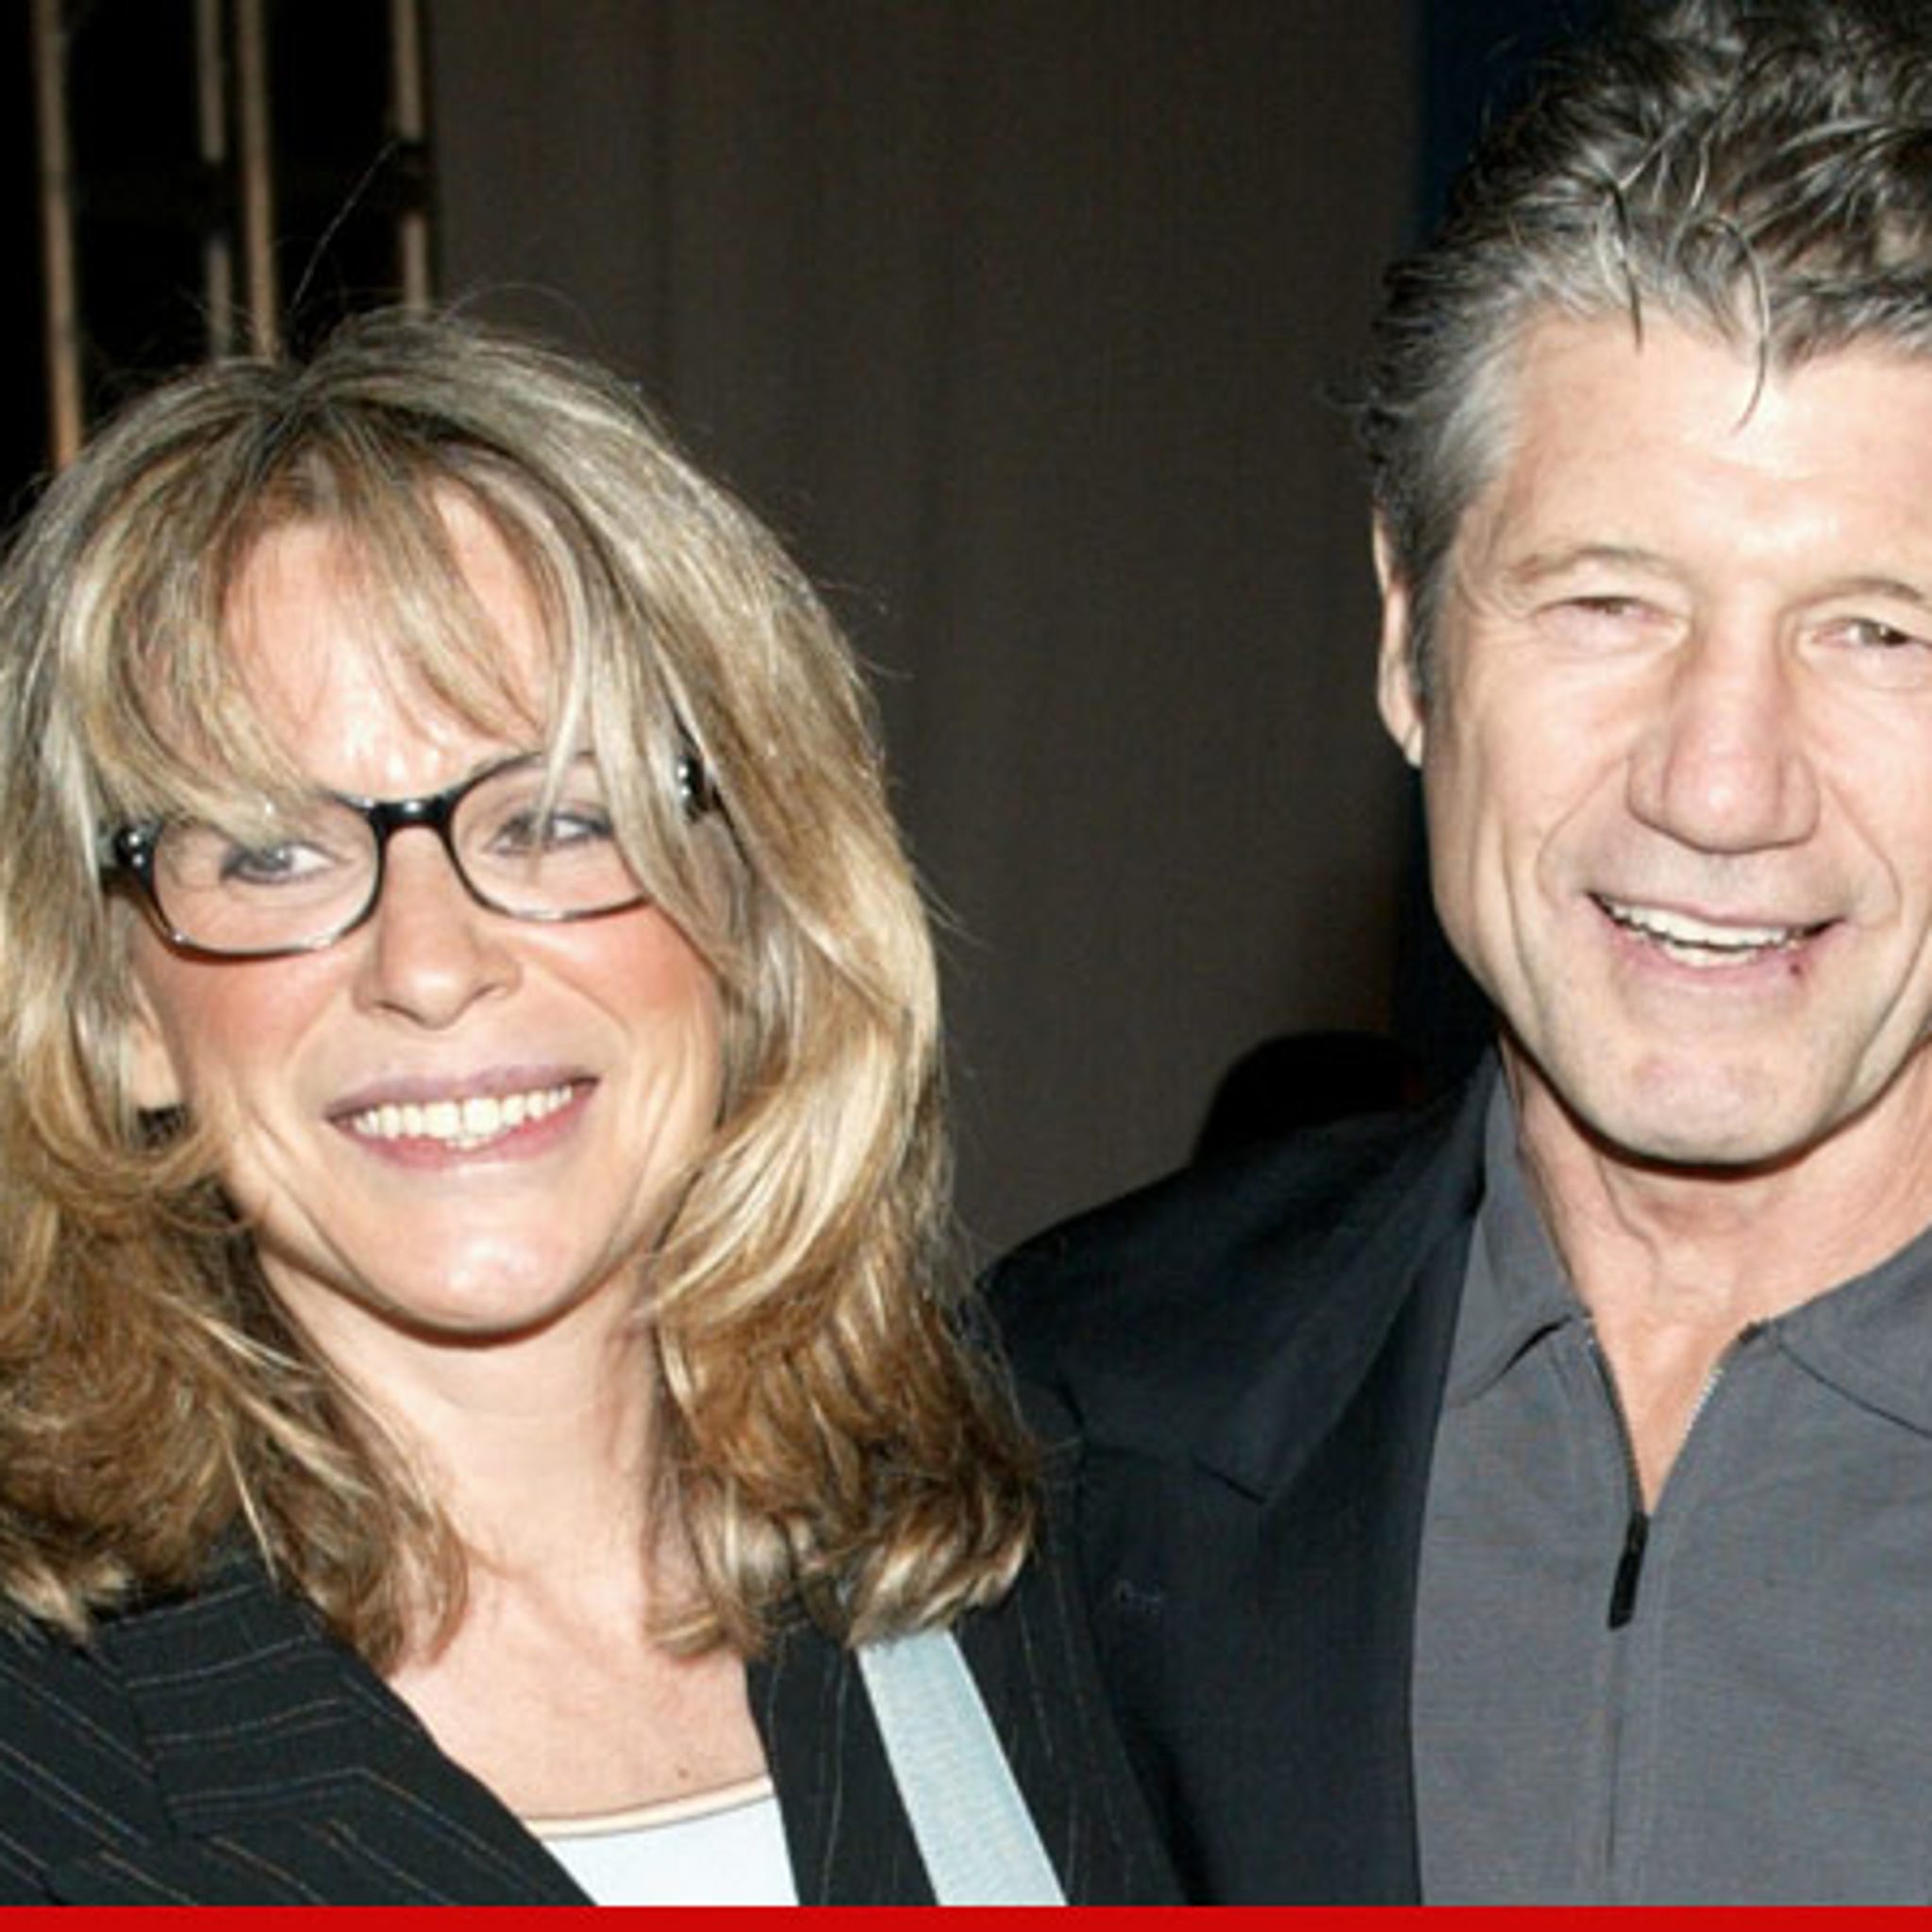 2 Guns” Star Fred Ward NOT Getting Divorced – Never Mind...We Worked it Out